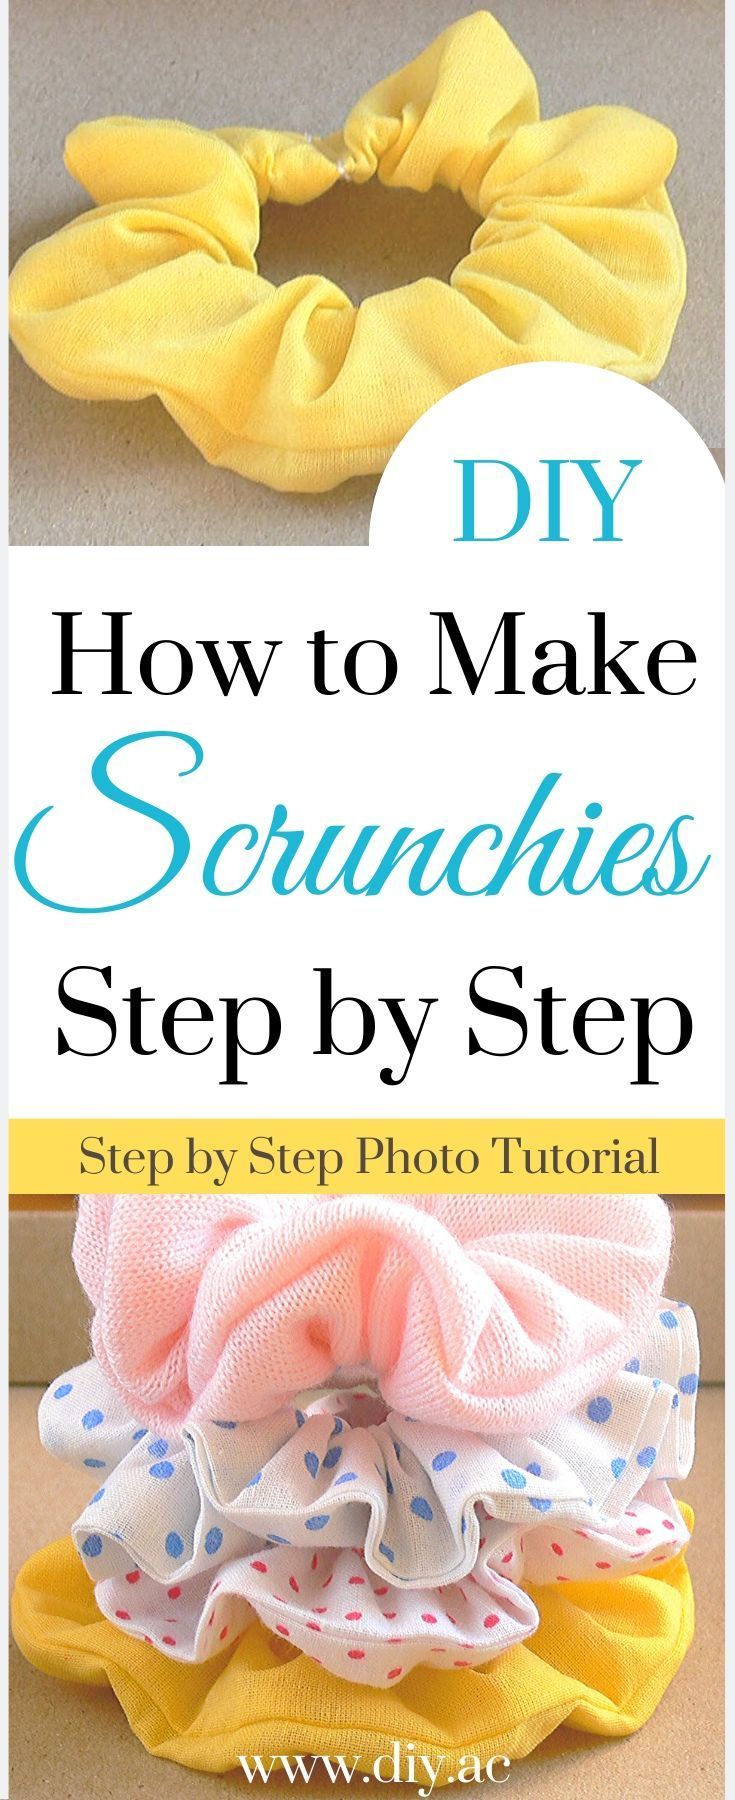 Free Sewing Pattern for Beginners - SCRUNCHIES DIY -   7 fabric crafts Toys free pattern ideas